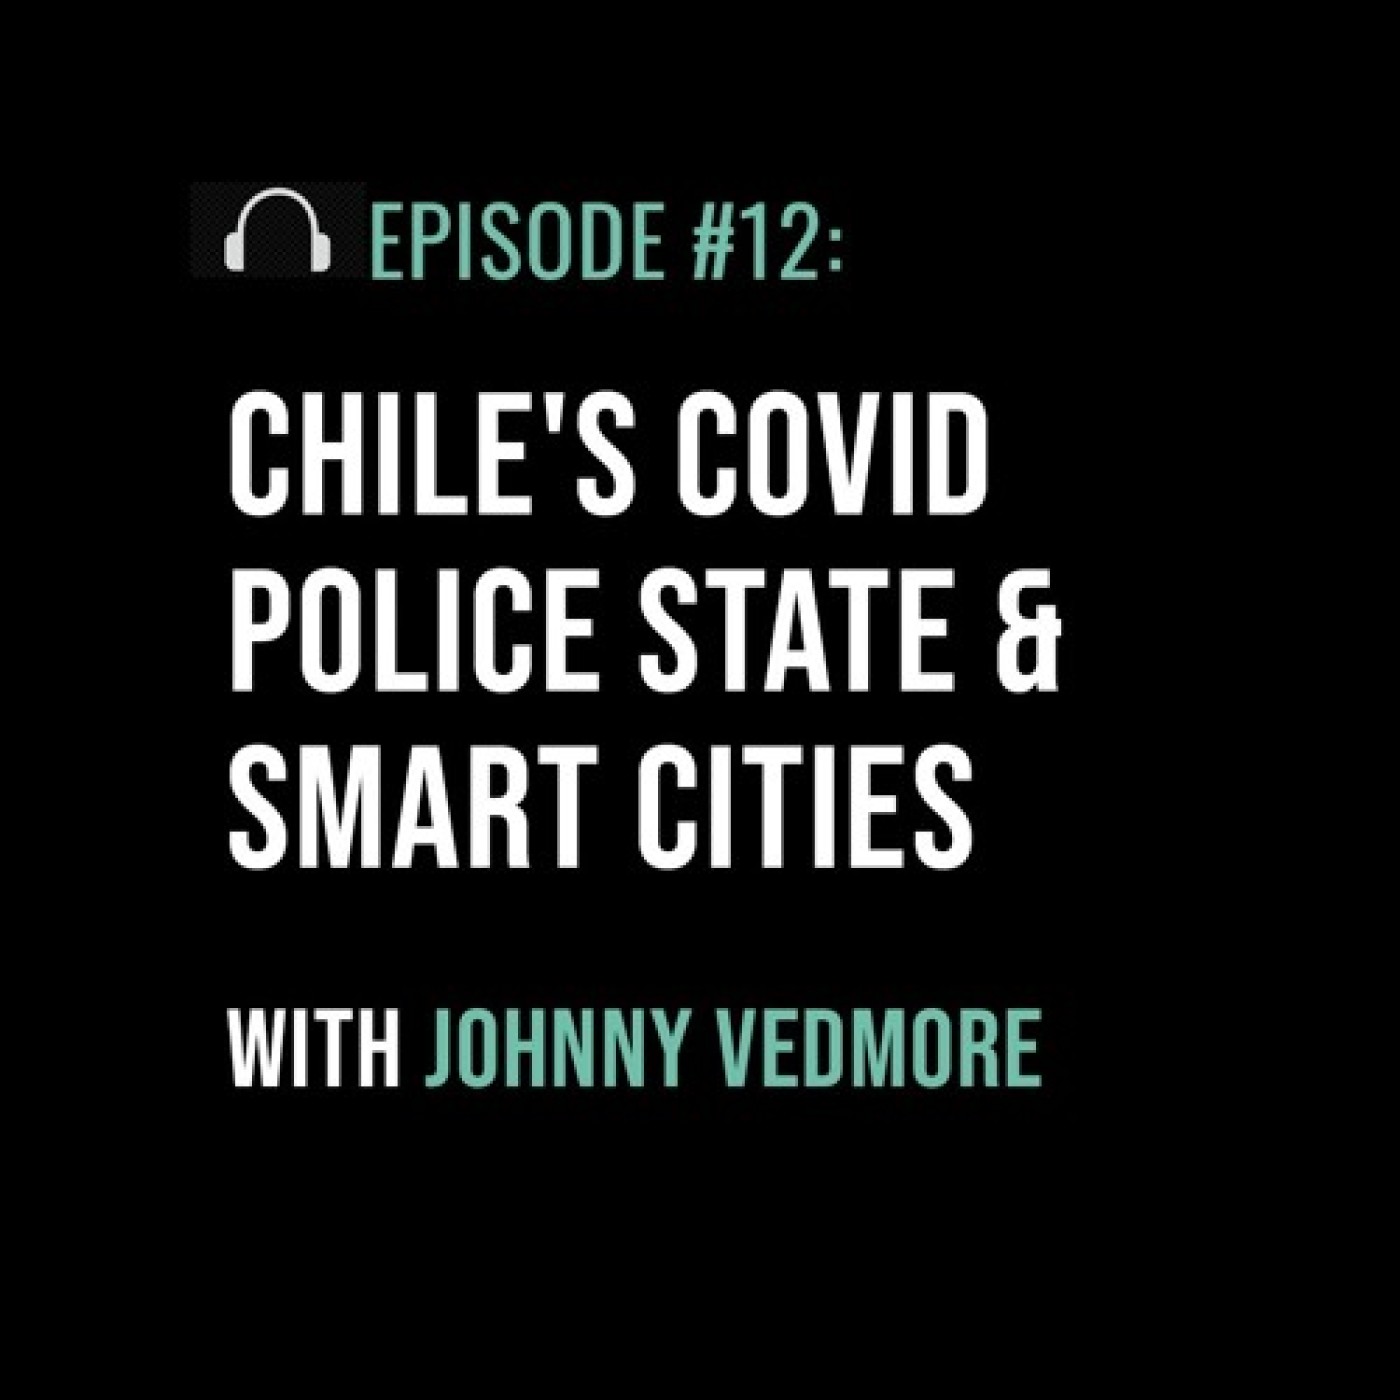 Chile’s COVID Police State & Smart Cities with Johnny Vedmore